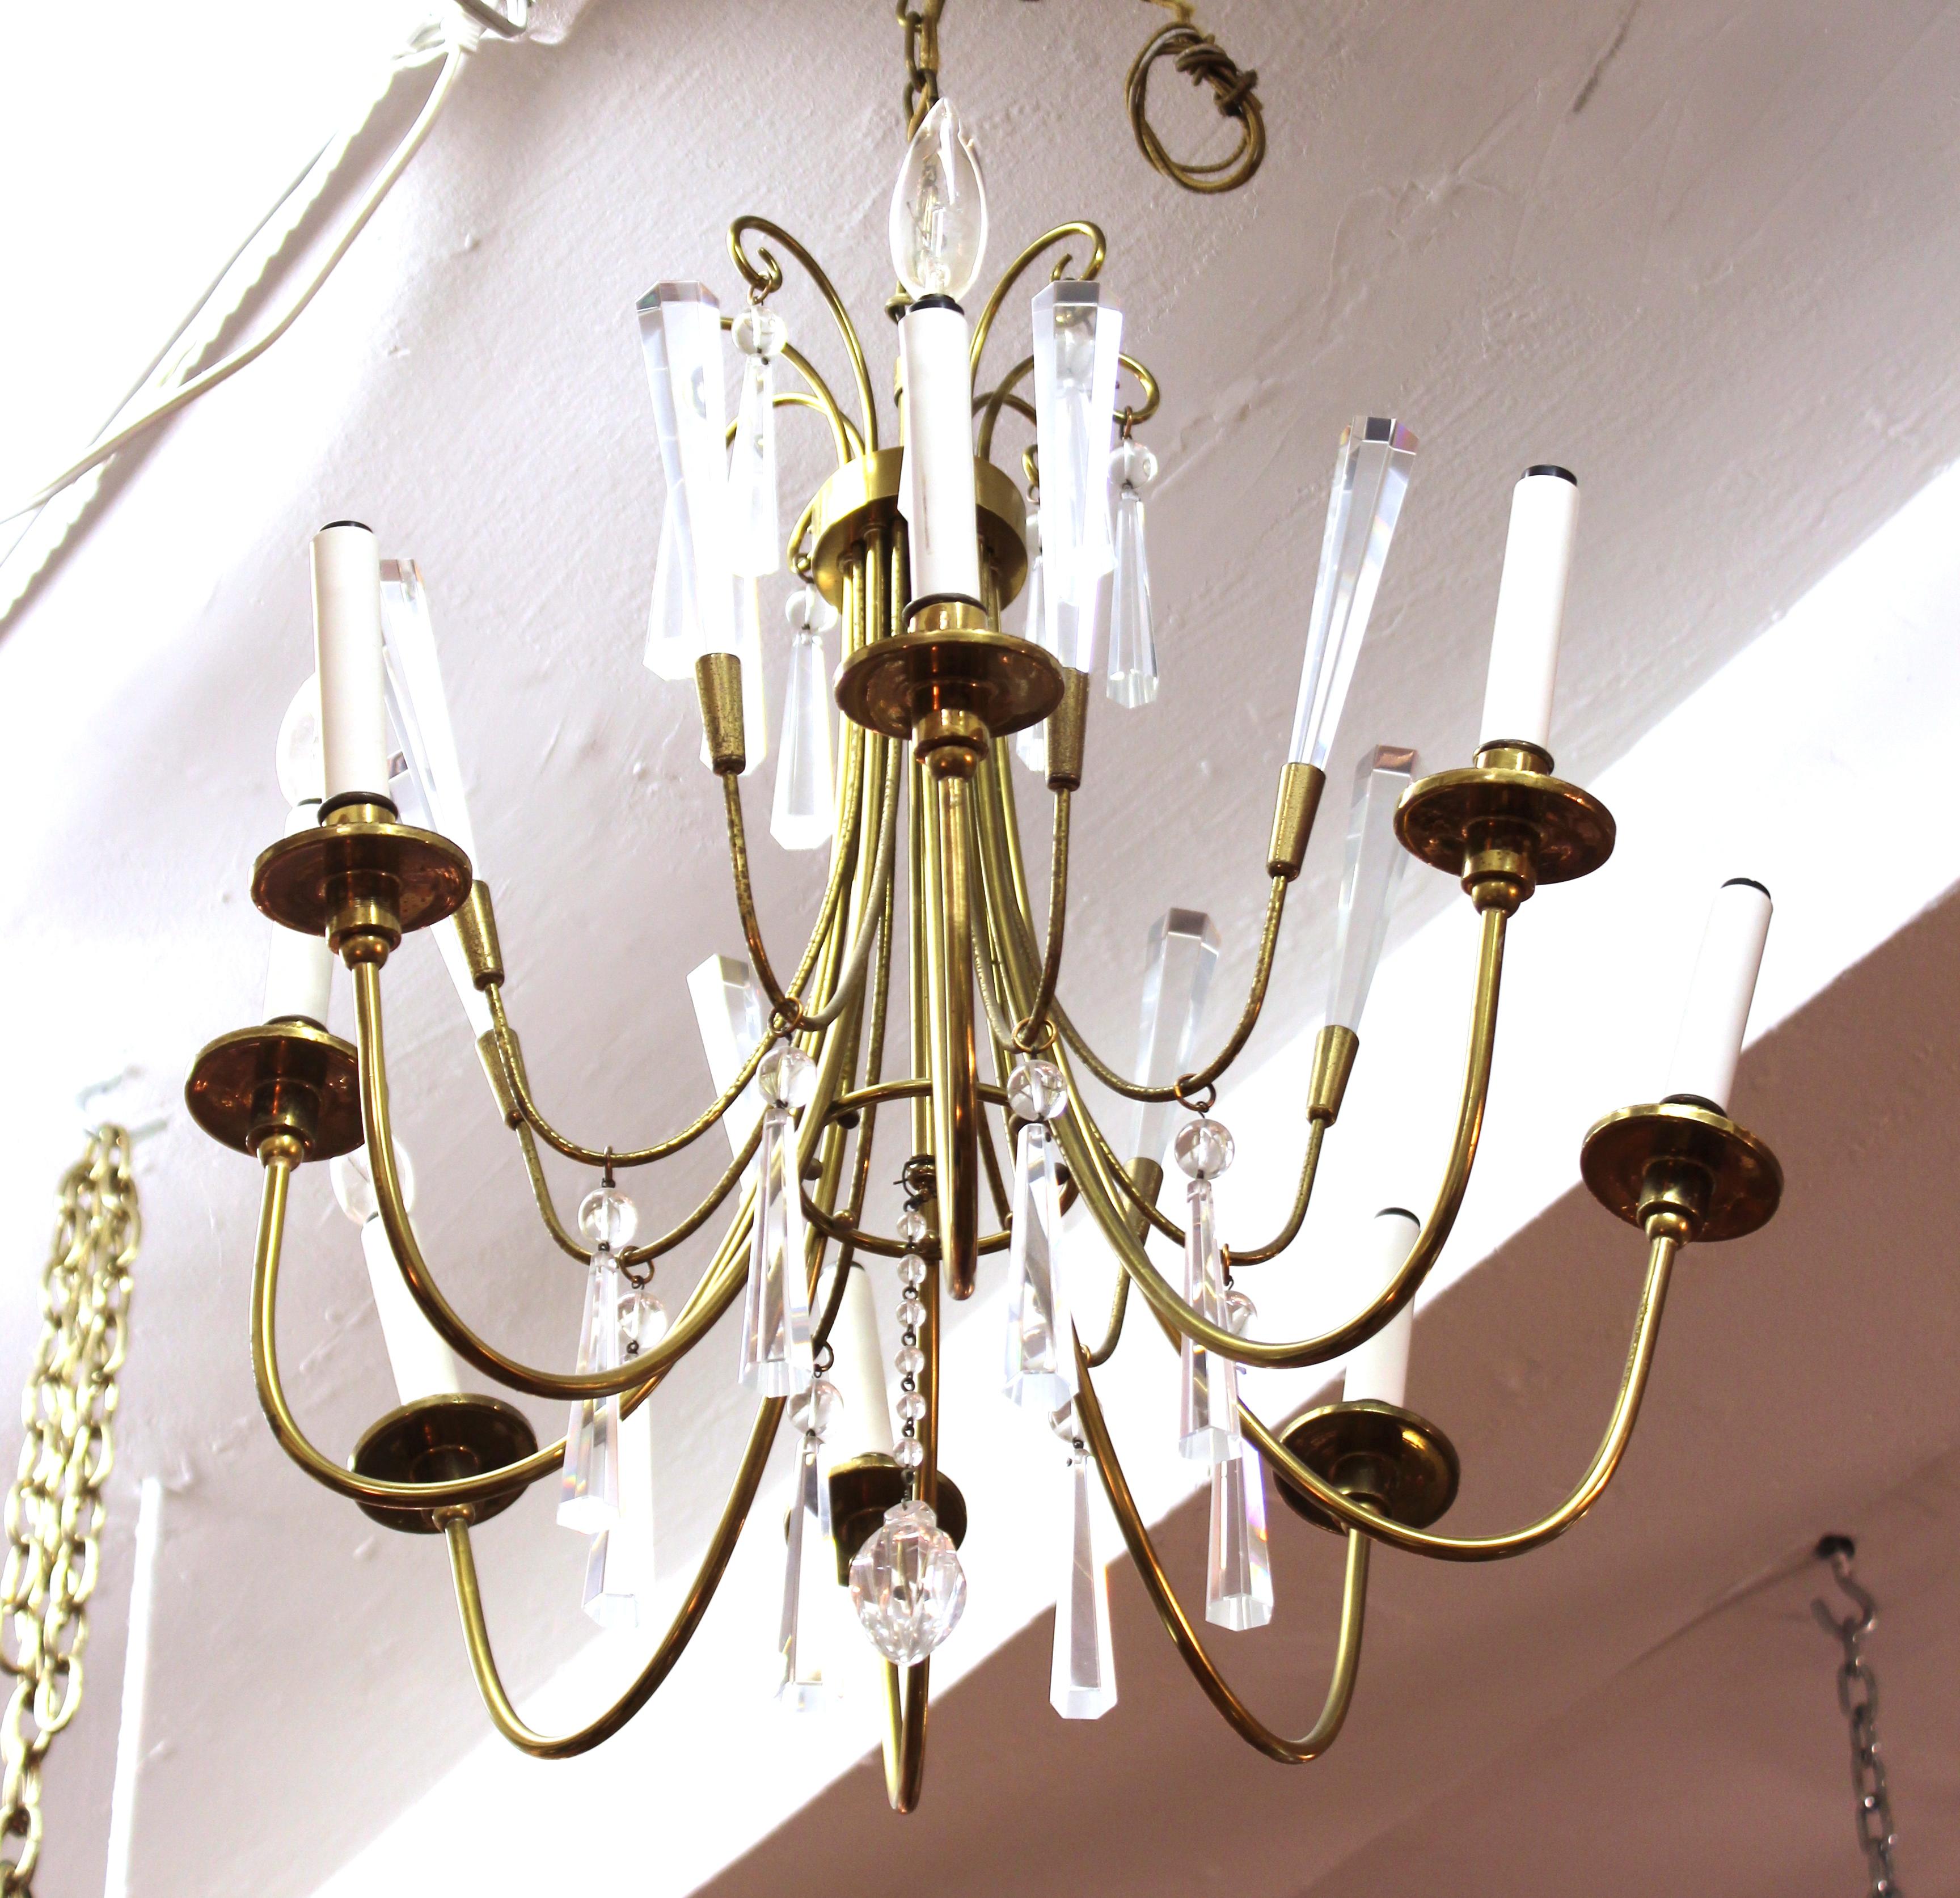 Mid-Century Modern European brass chandelier with crystal pendants. The piece was likely made in Austria. In great vintage condition with age-appropriate wear and use.